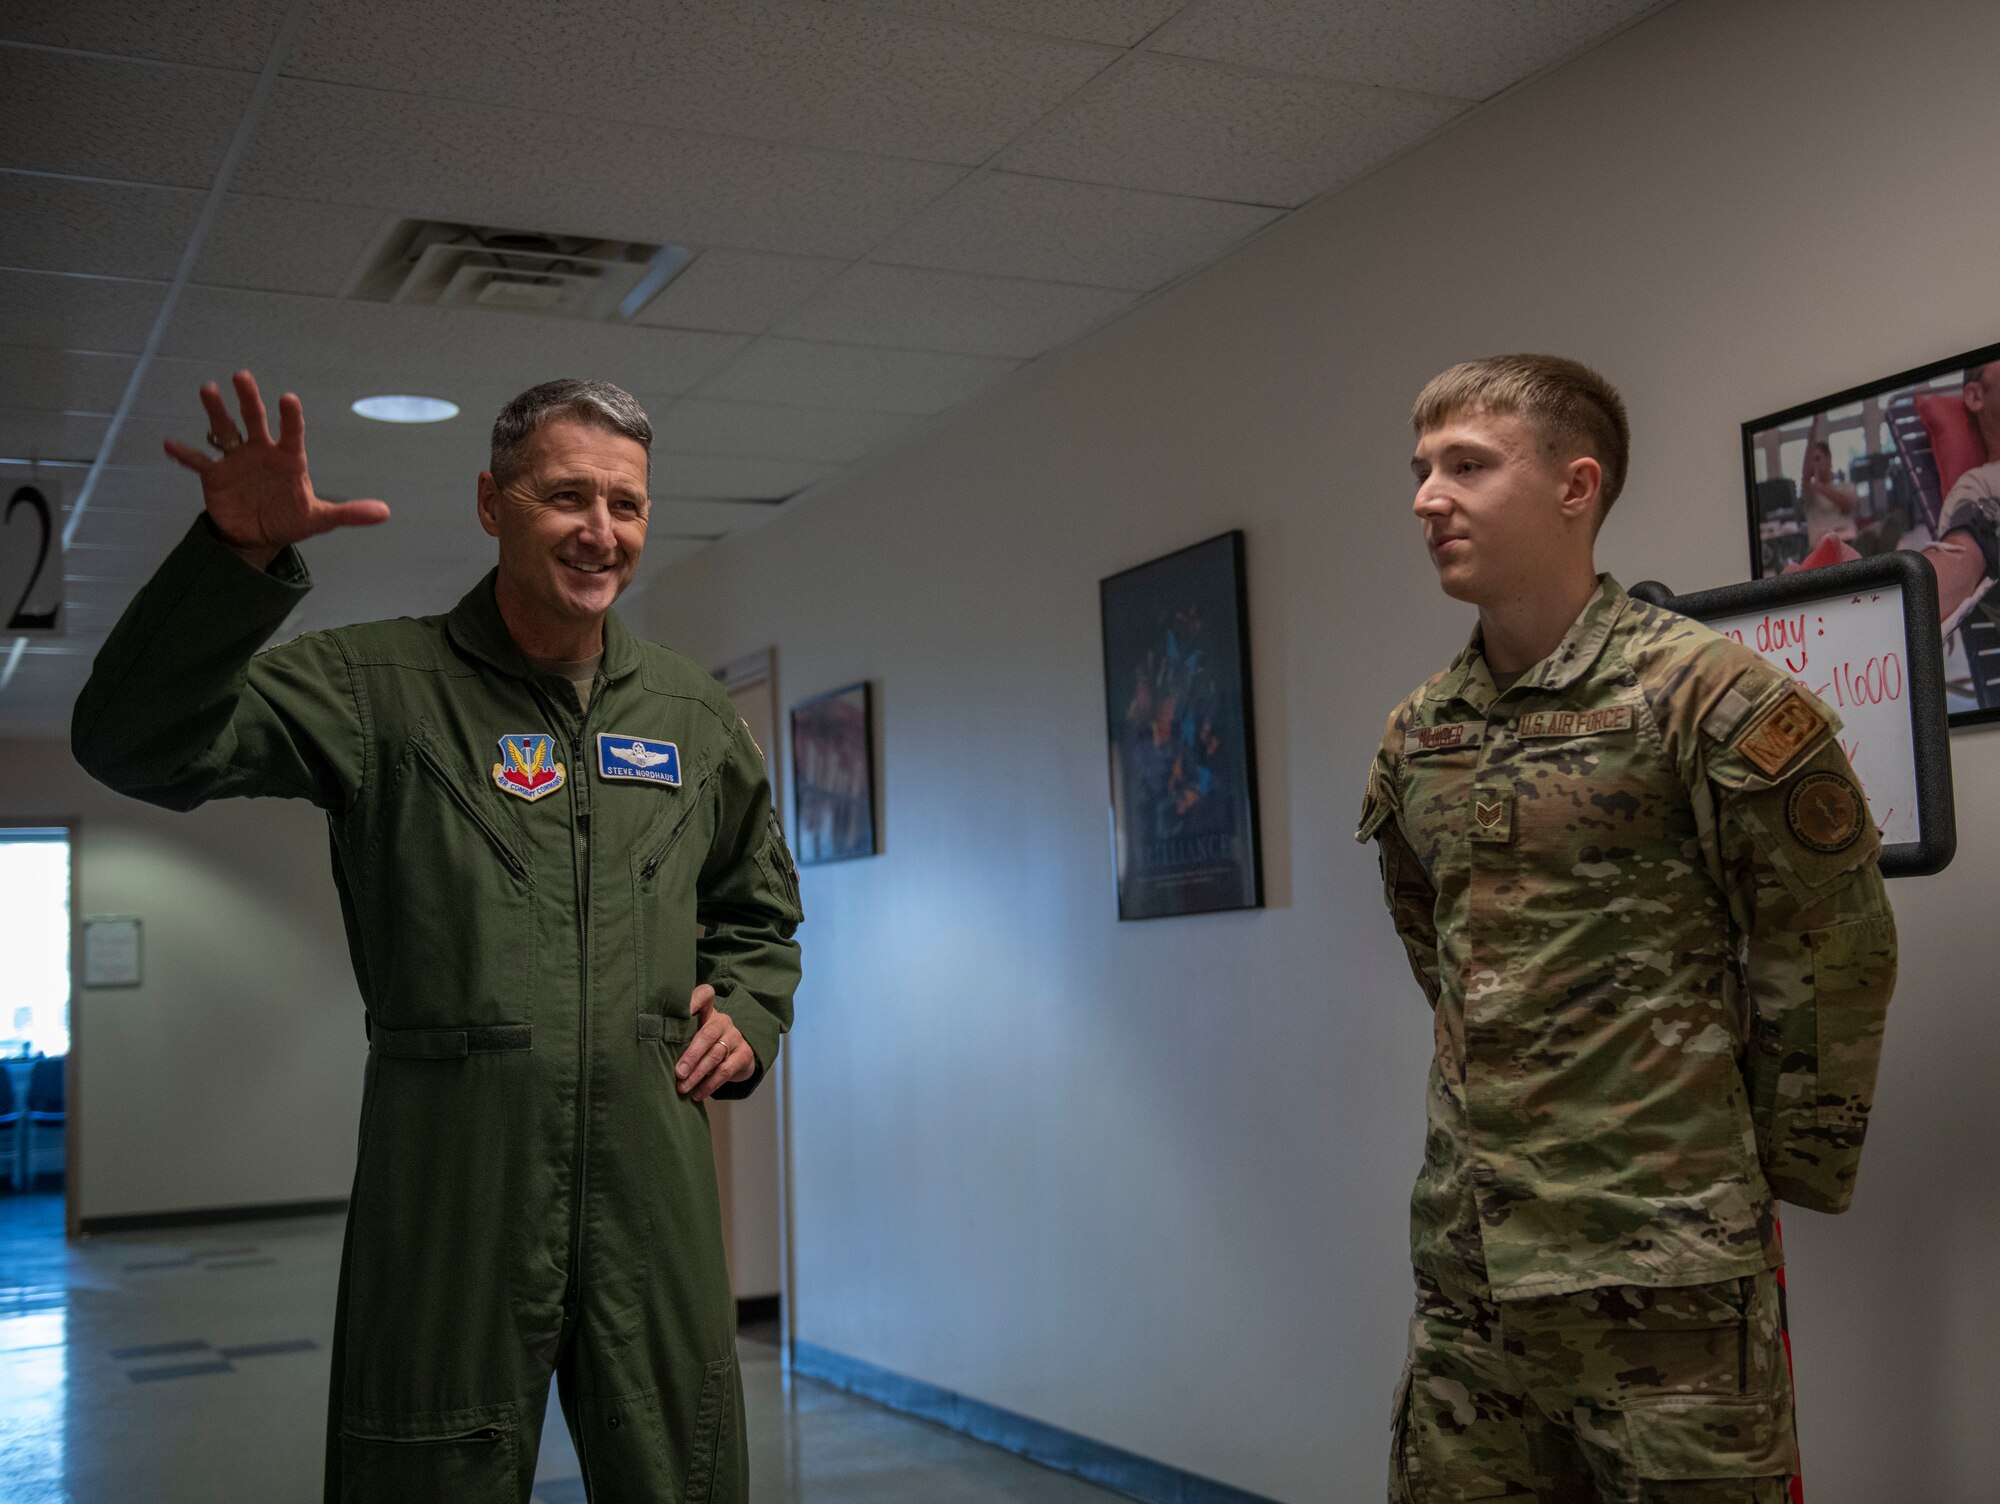 U.S. Air Force Lt. Gen. Steven S. Nordhaus, 1st Air Force commander, presents a challenge coin to U.S. Air Force Staff Sgt. Colton Munger, an aerospace medical technician, assigned to the Ohio National Guard’s 180th Fighter Wing, during a visit with the 180FW Medical Group, in Swanton, Ohio, Feb. 1, 2024. Munger was coined for his exemplary performance within the Medical Group, maintaining the highest levels of proficiency and readiness. (U.S. Air National Guard photo by Airman 1st Class Nicholas Battani)